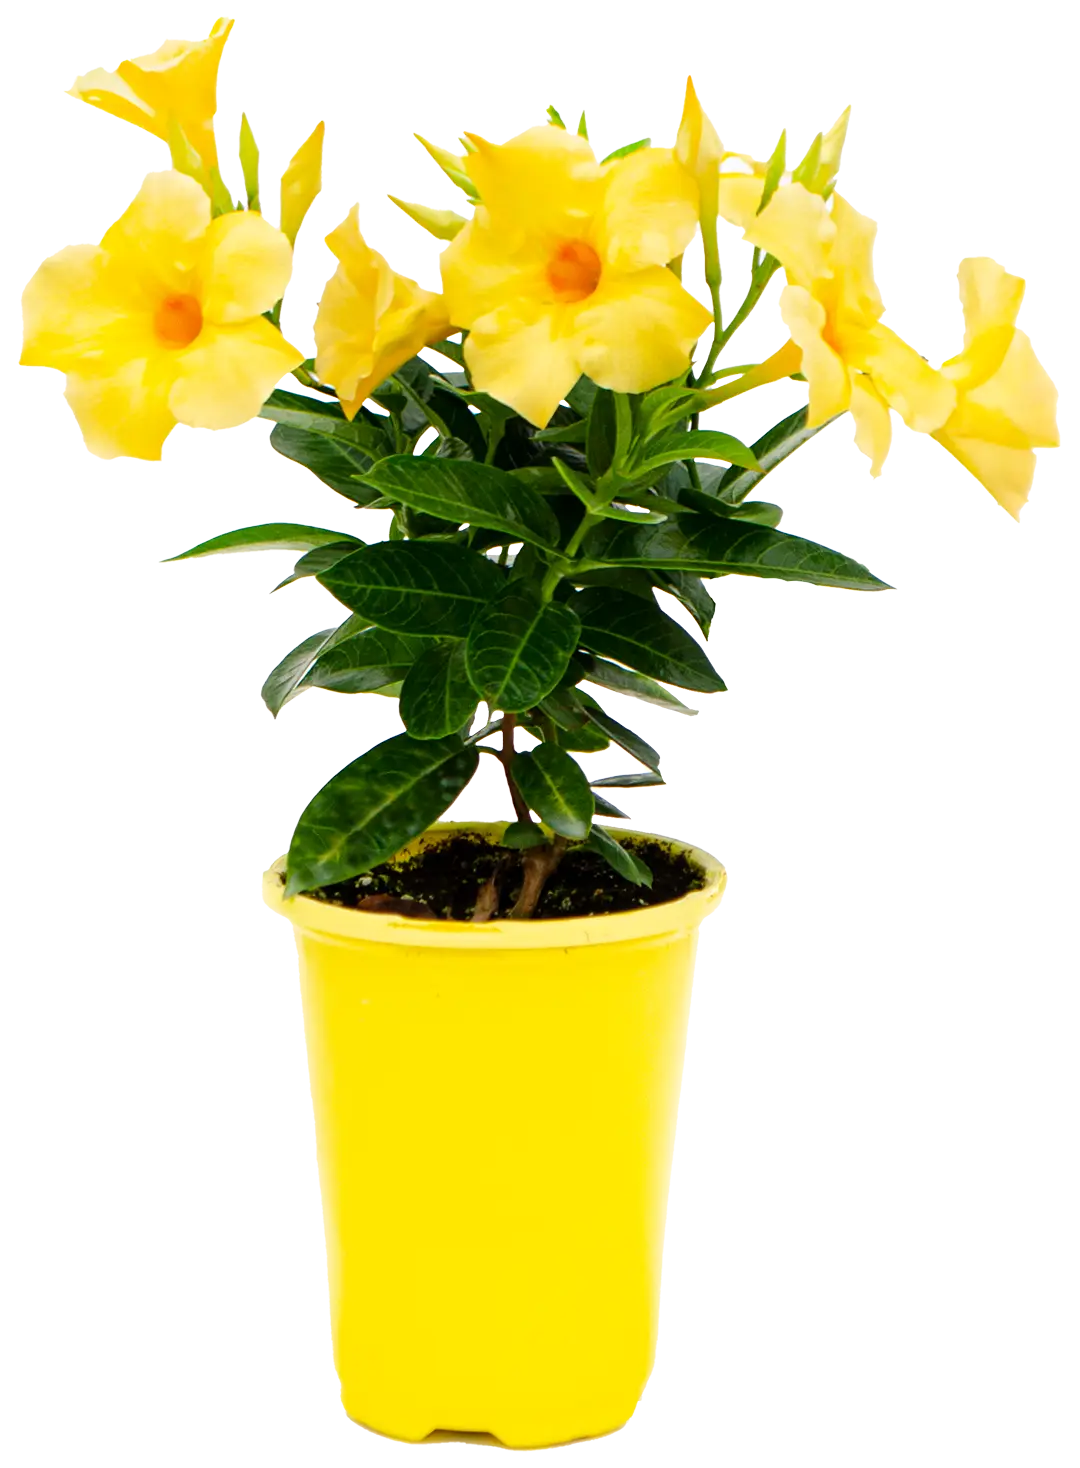 large yellow calypso limone standing upright in a yellow pot